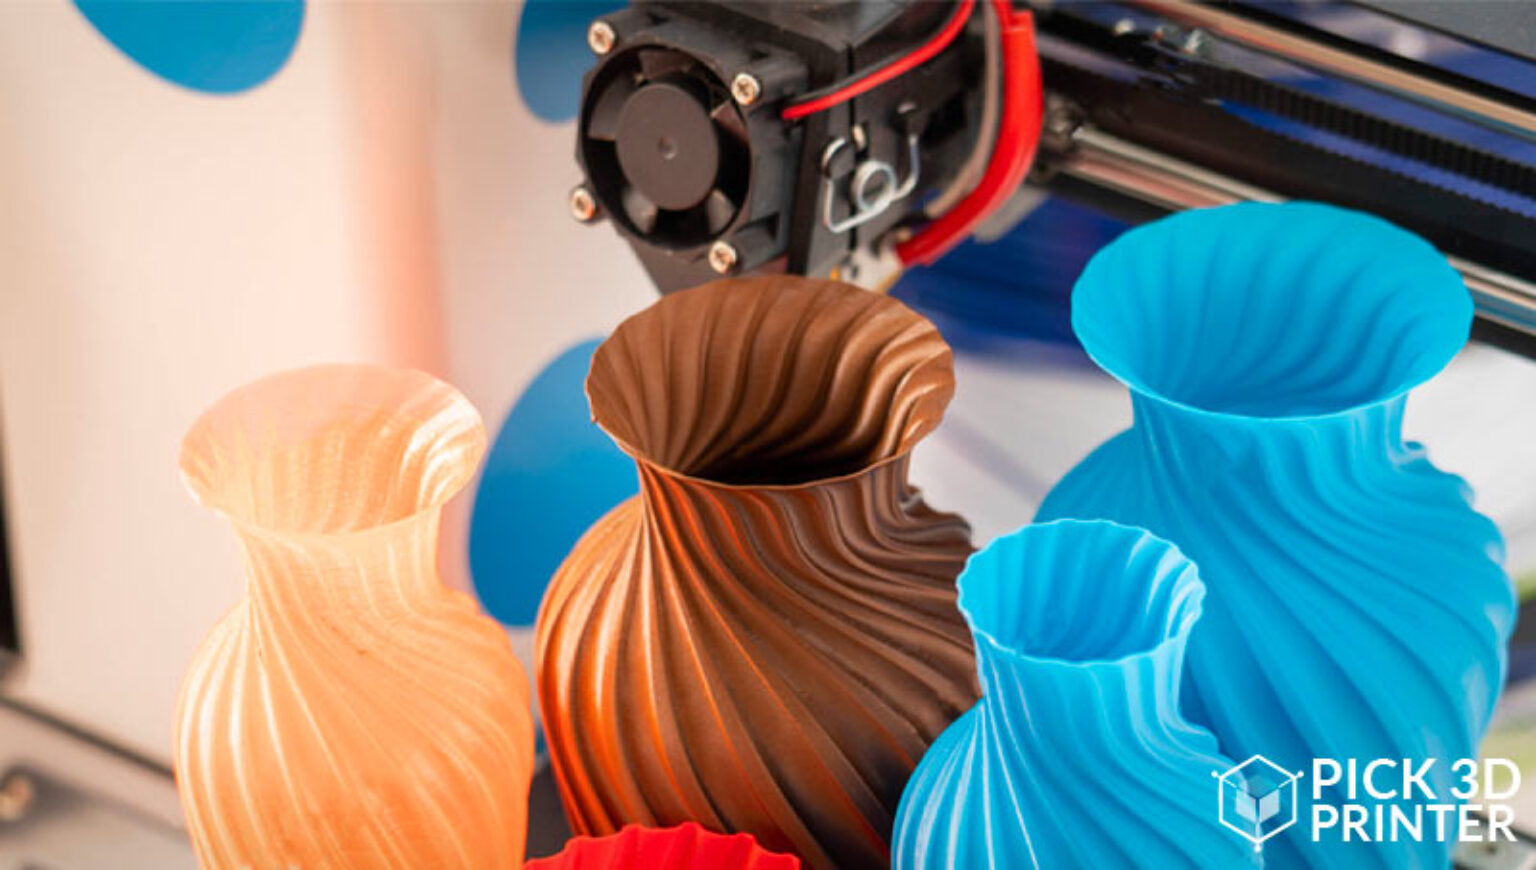 9 3D Printing Business Ideas to Get Inspired From Pick 3D Printer